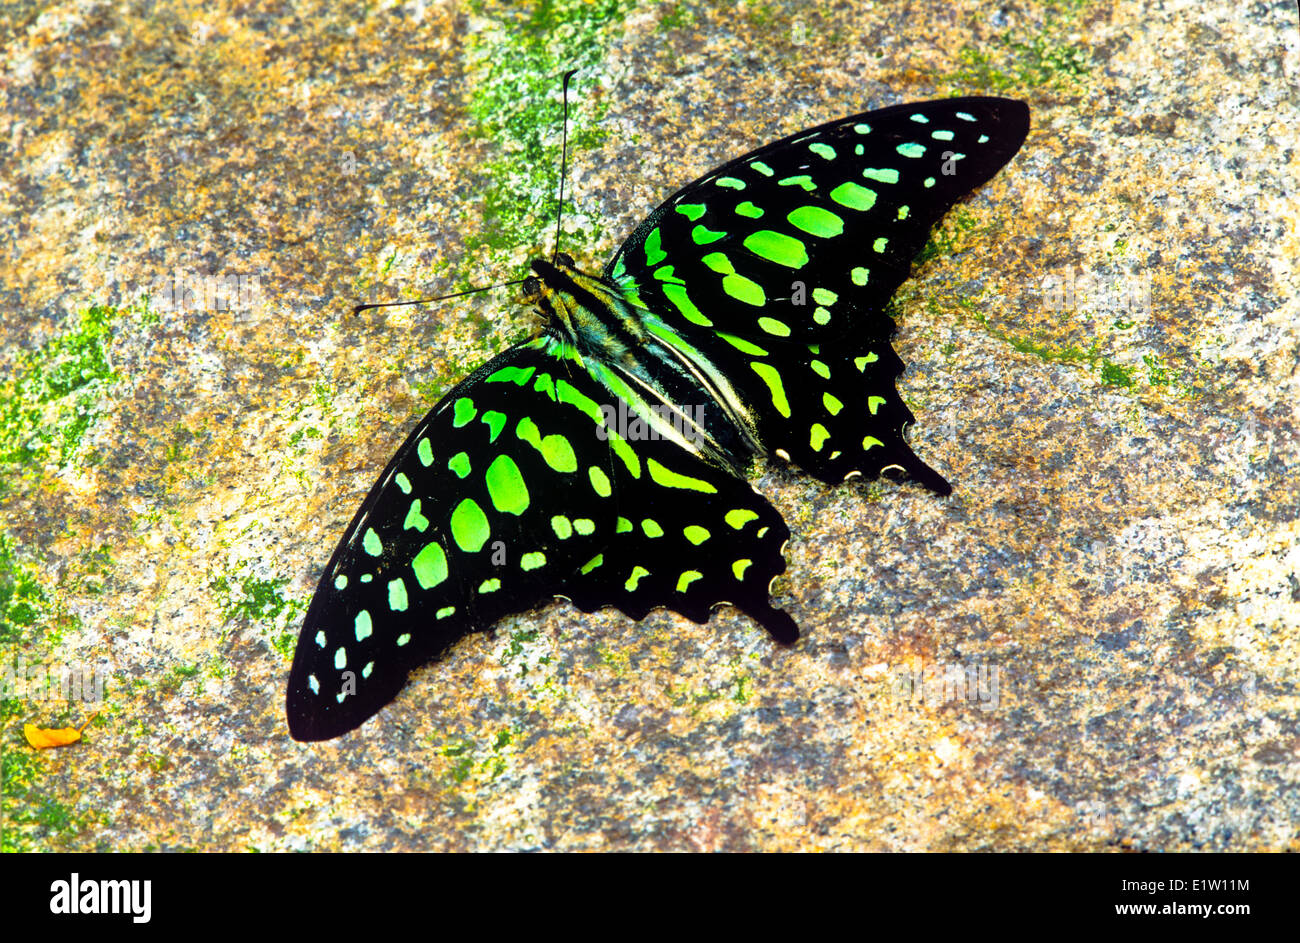 Tailed Jay (Graphium Agamemnon Agamemnon) butterfly, Männlich, dorsale Ansicht, Malaysia Stockfoto